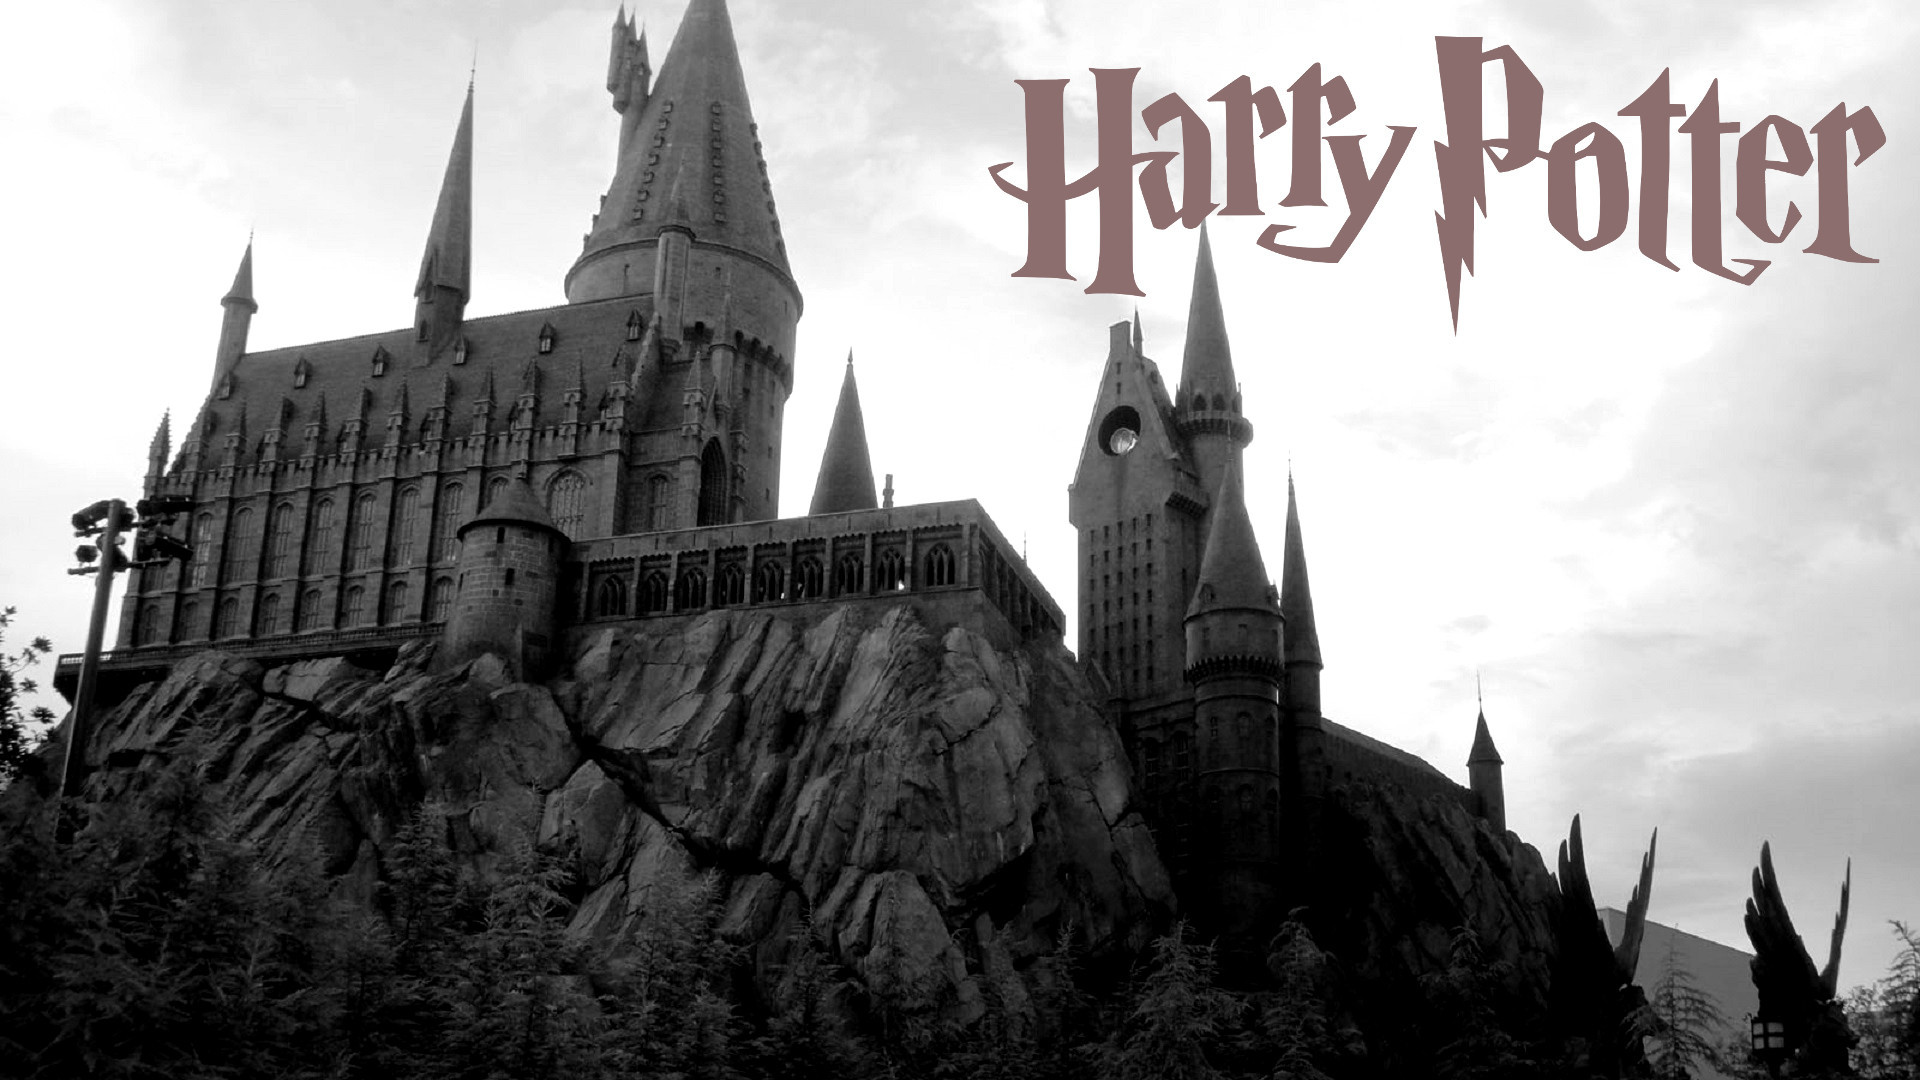 1920x1080 Harry Potter Wallpaper with logo and Hogwarts